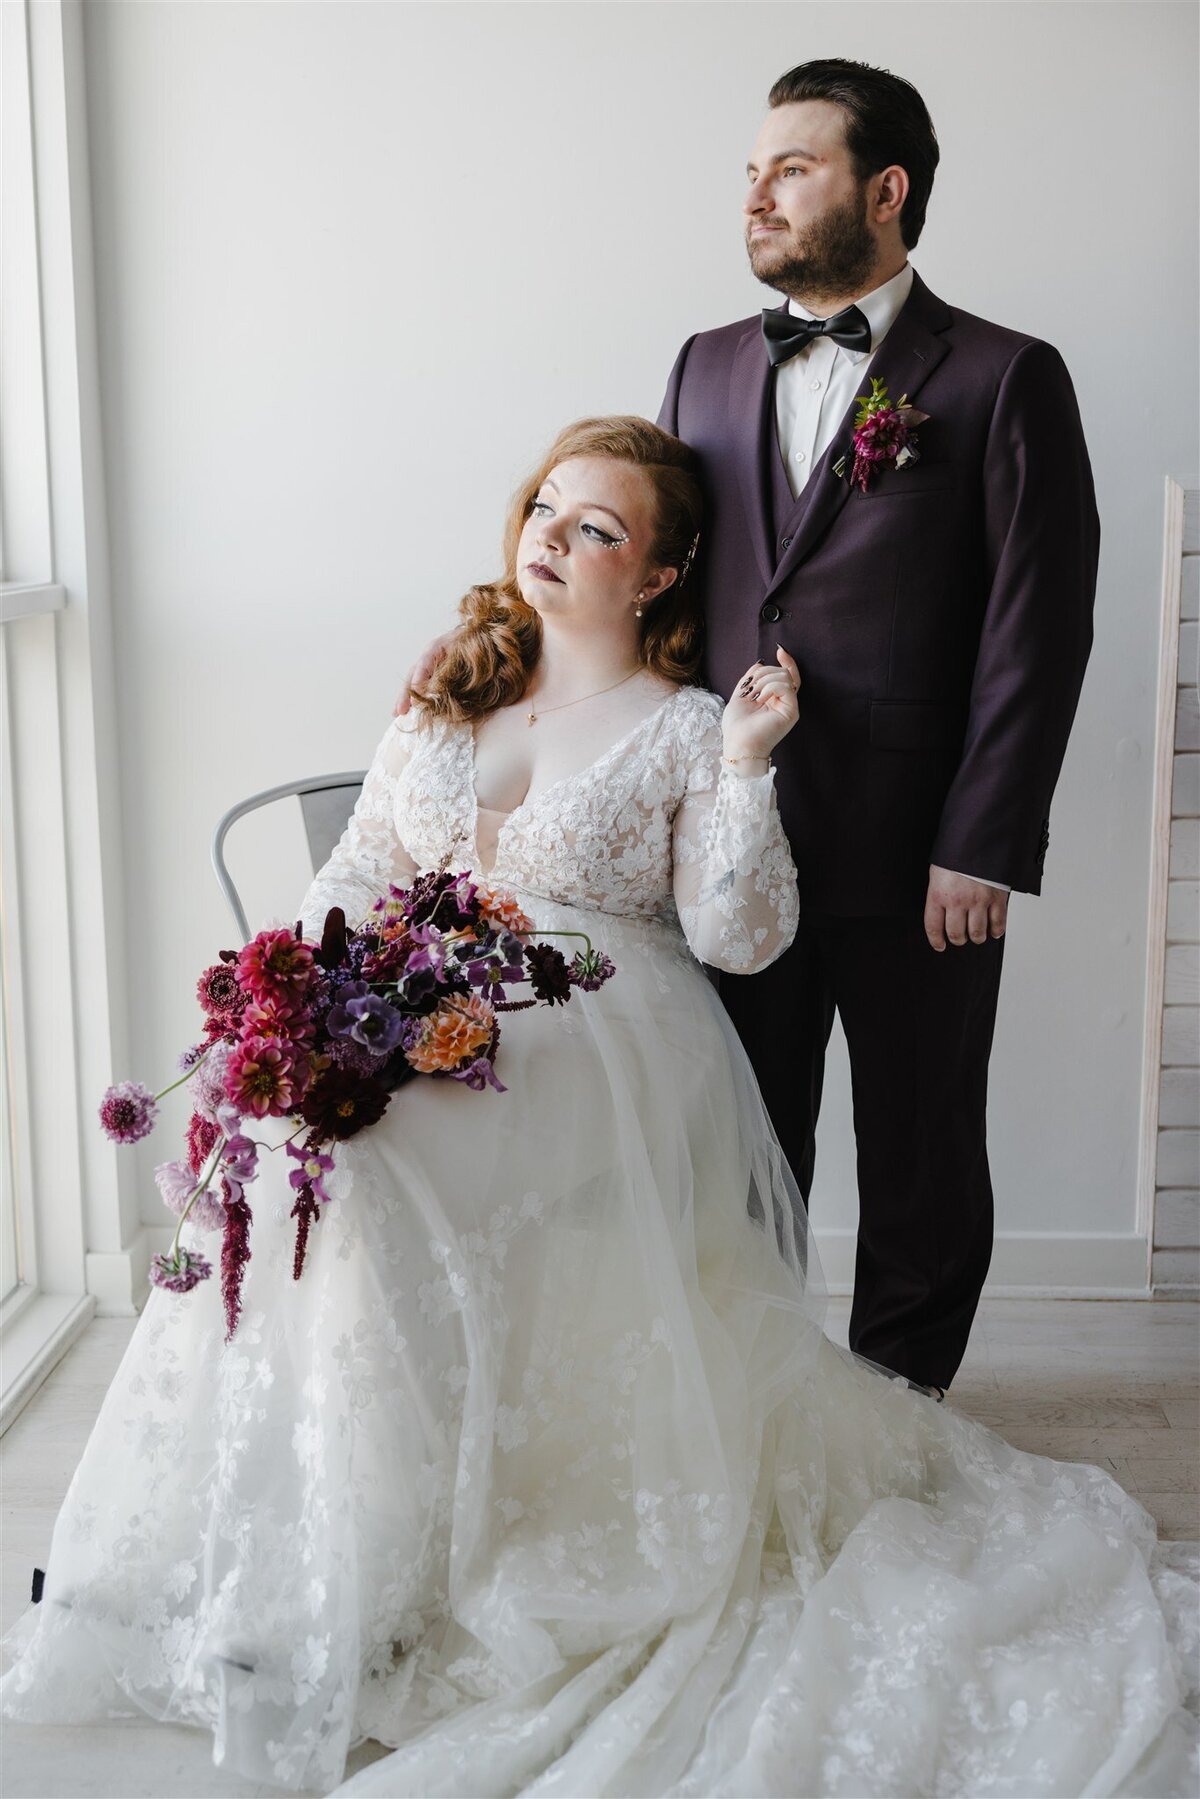 Wedding portraits at The White Chapel Project in NJ